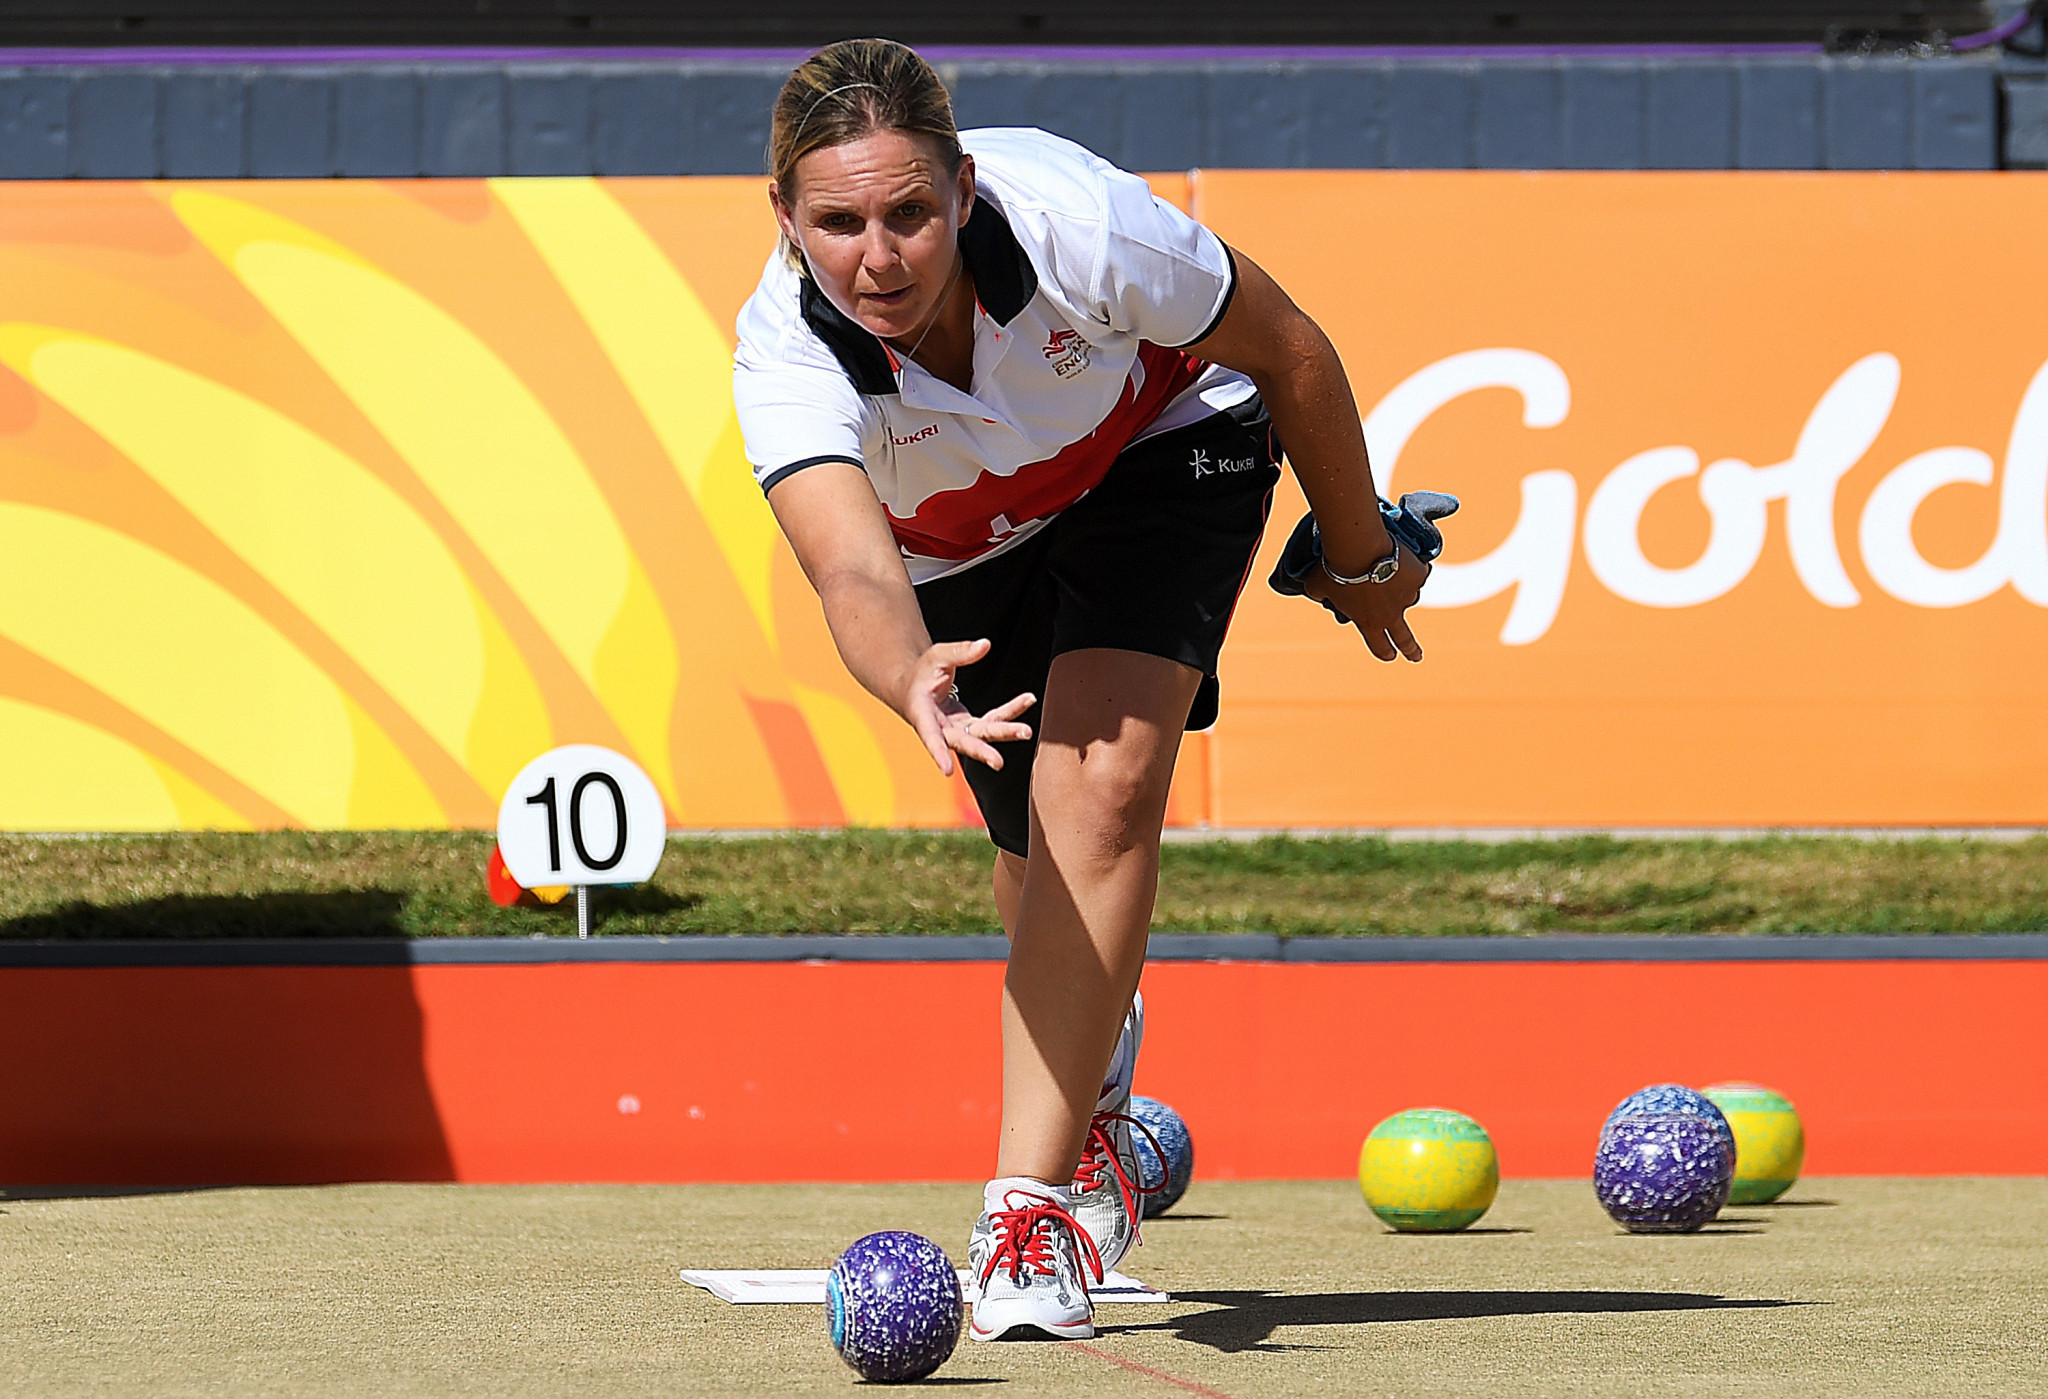 Three-time Commonwealth Games lawn bowls gold medallist Falkner "thrilled" by MBE award